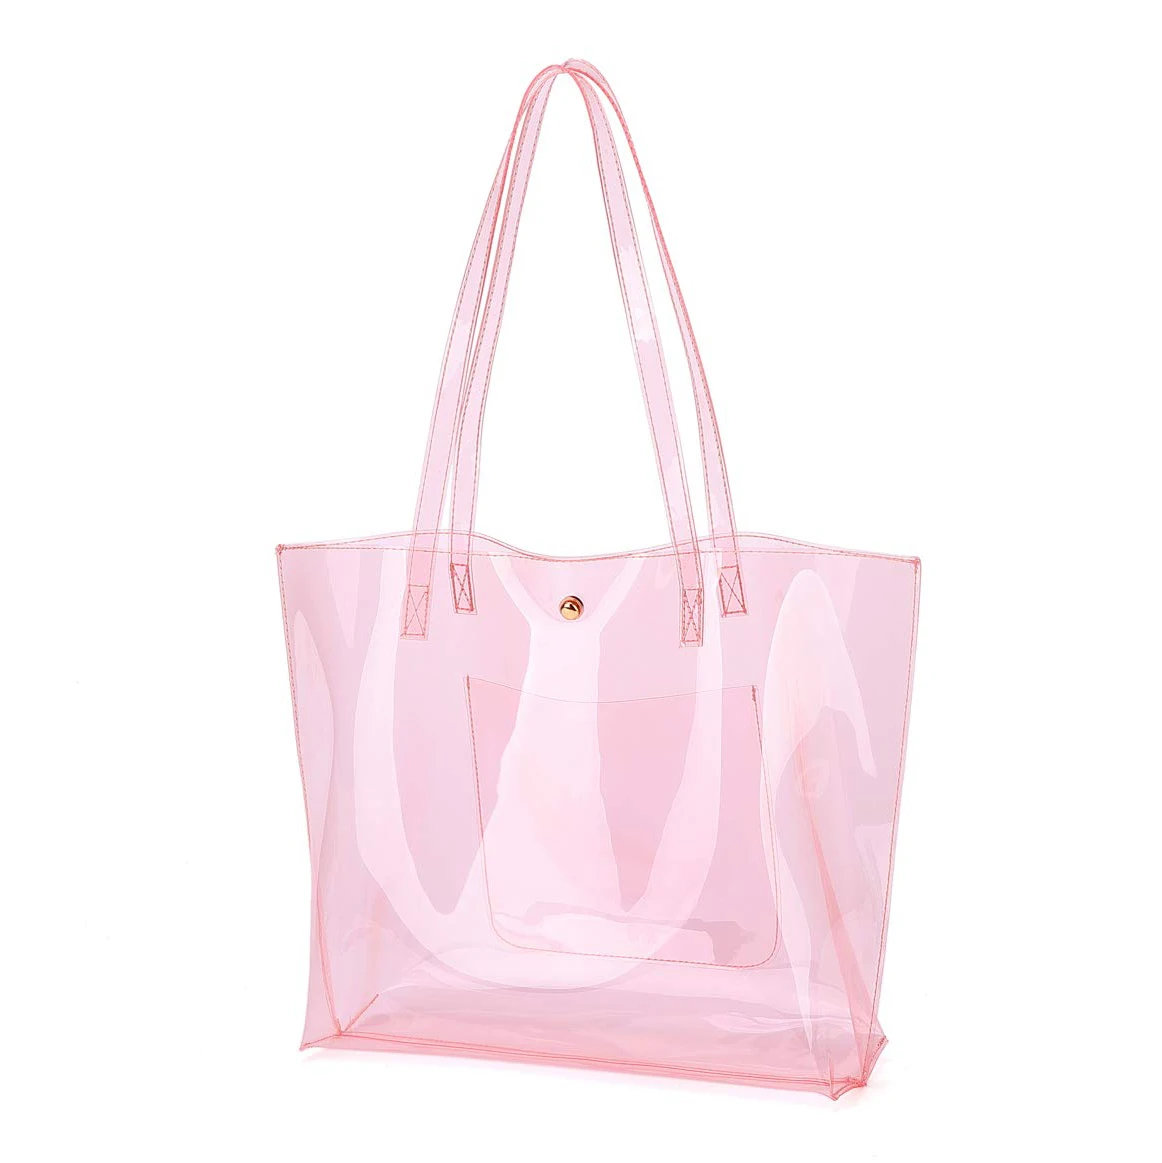 Buy Fashion Clear Crossbody Bag PVC Jelly Tote Bag Transparent